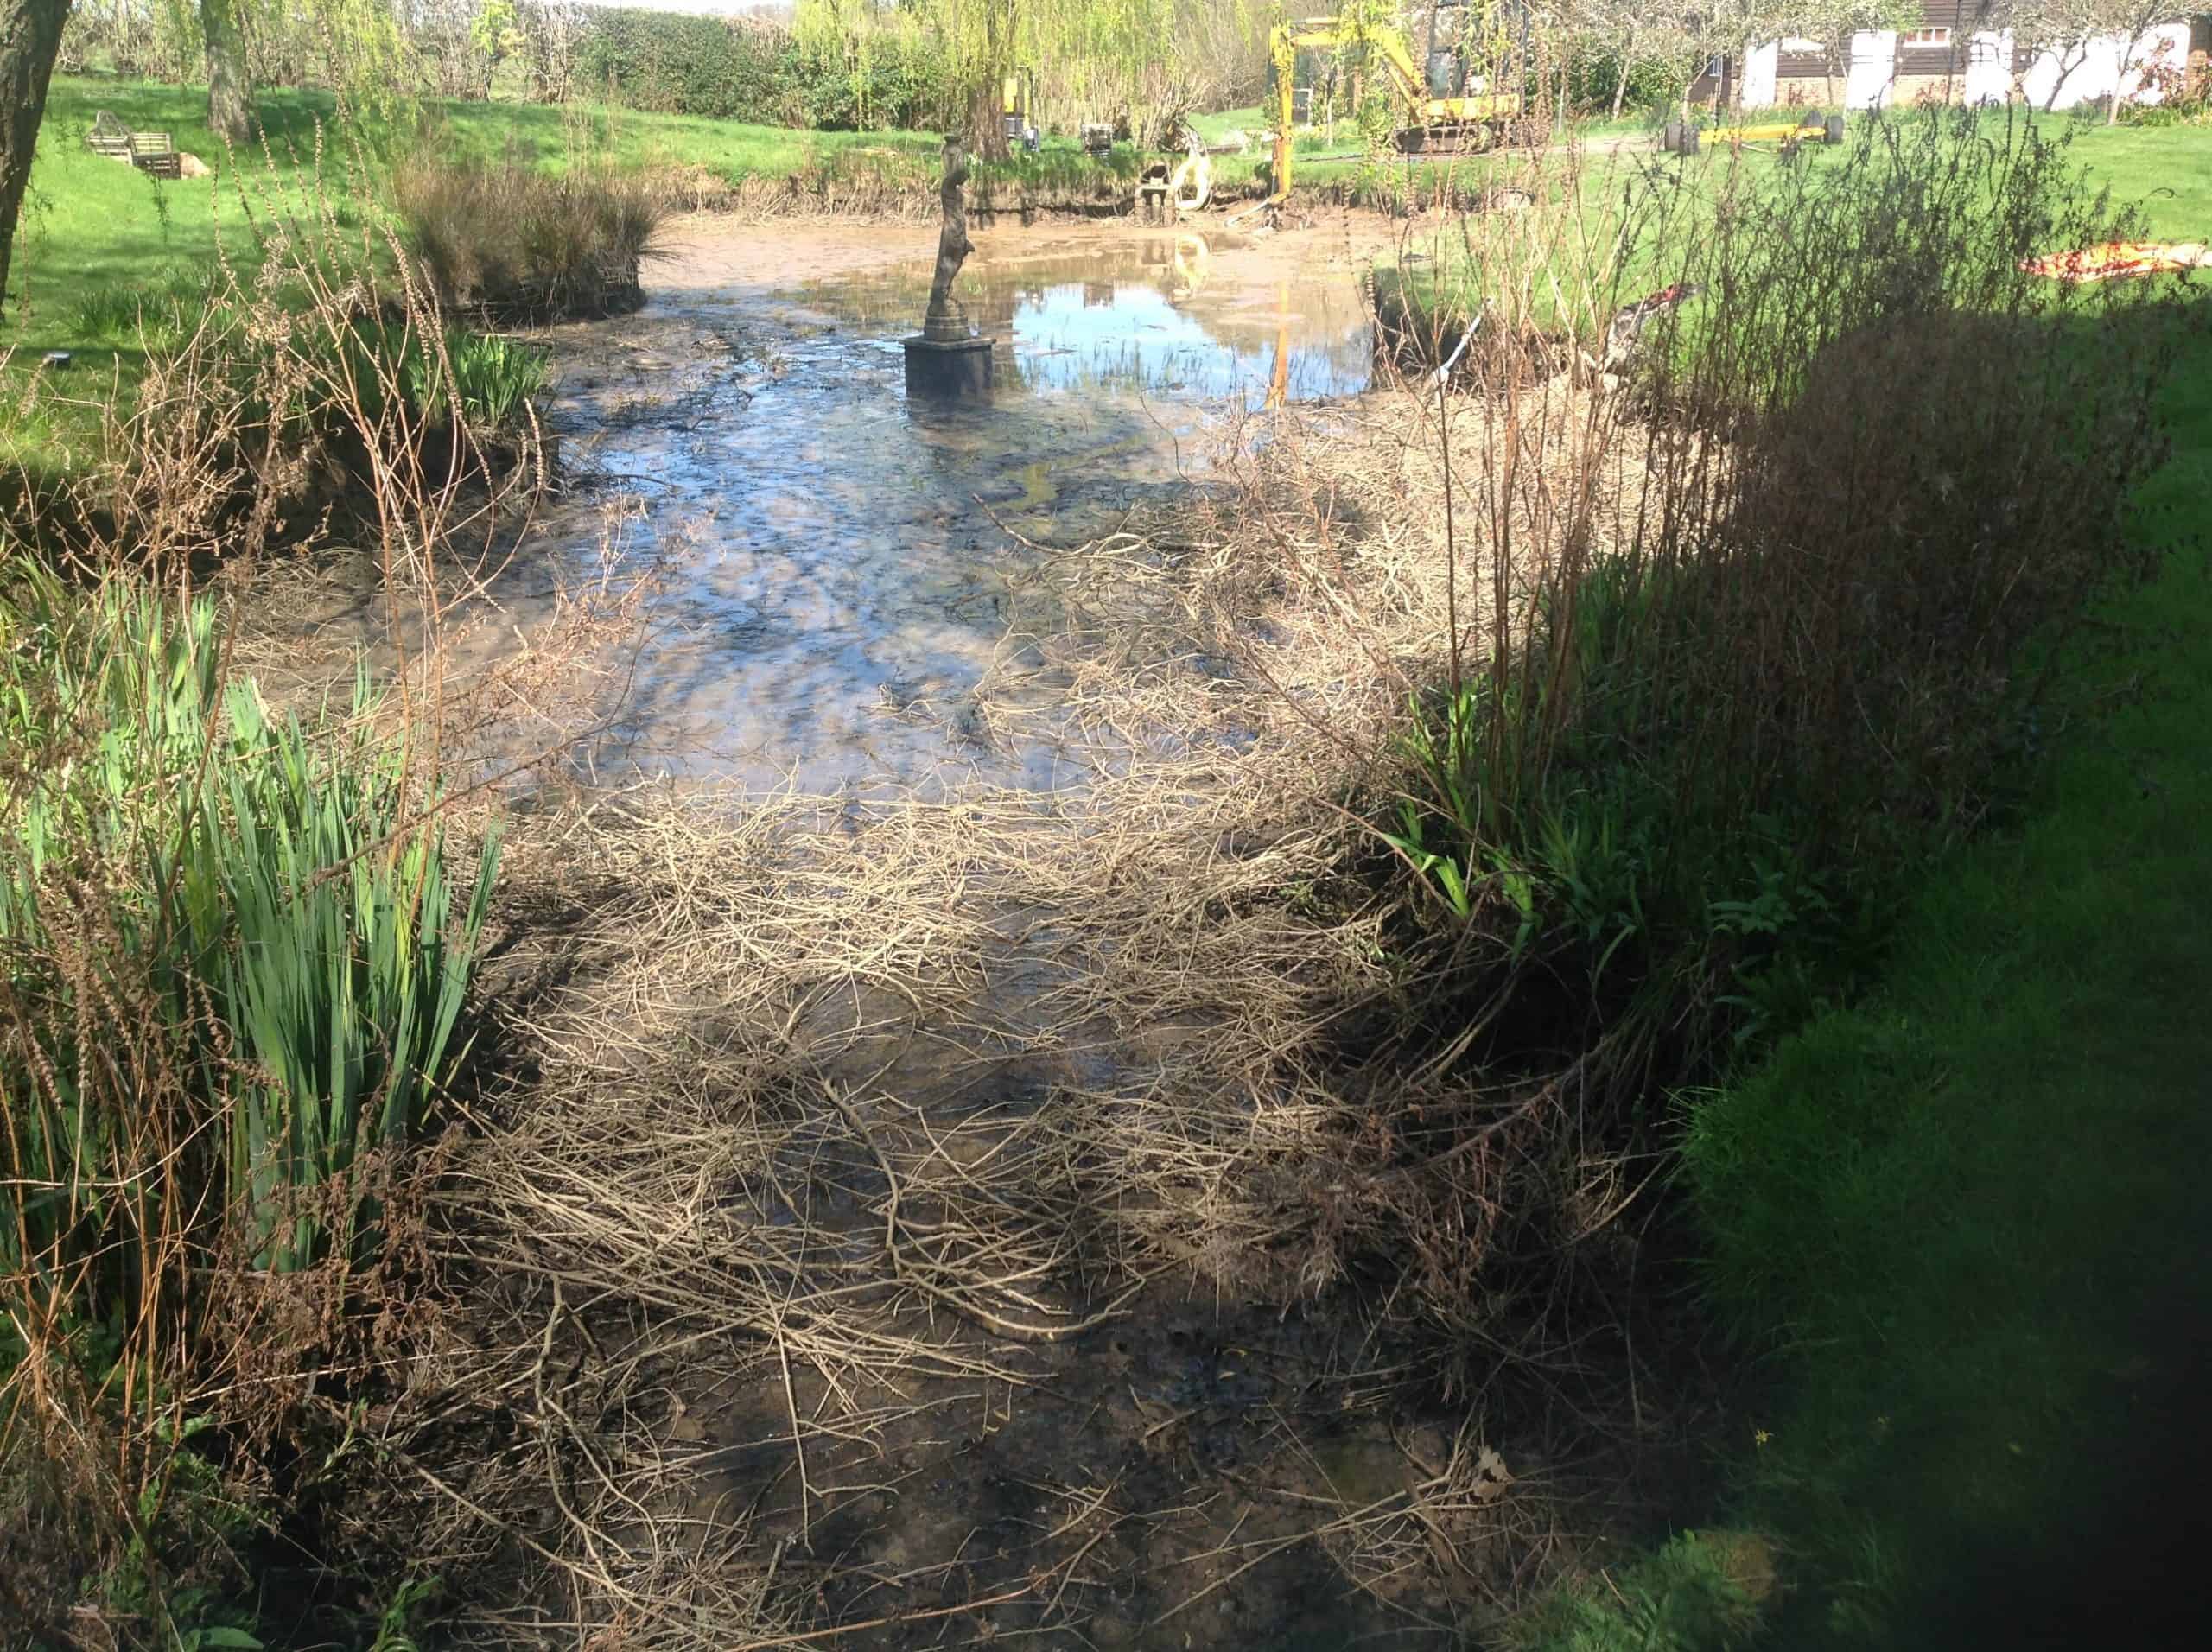 A Pond before employing dredging and desilting operations